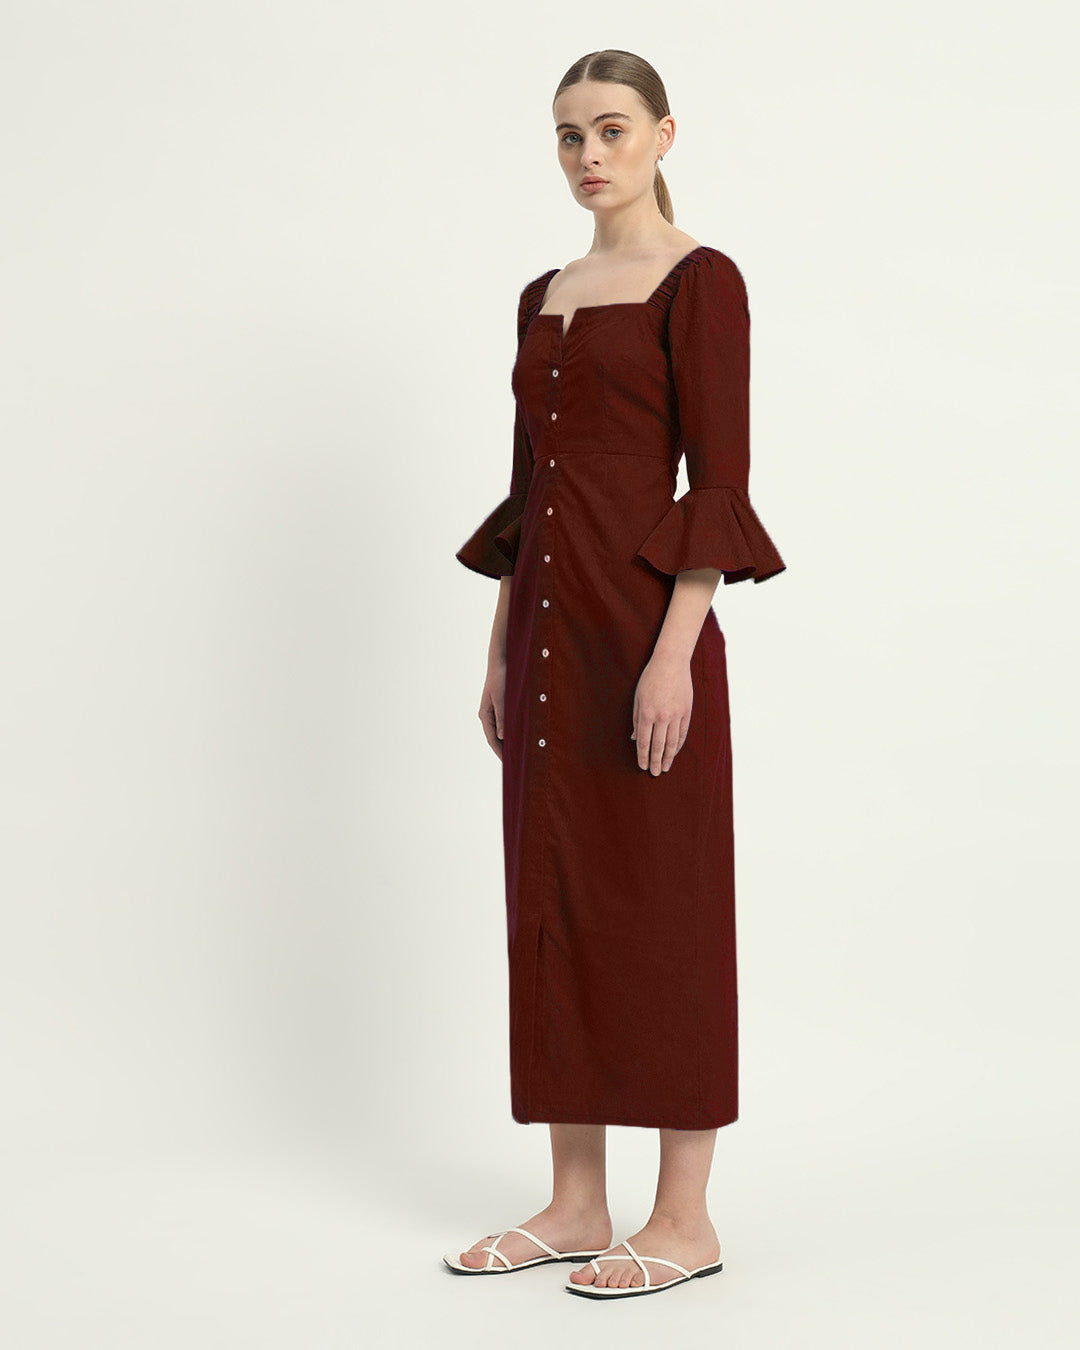 The Rouge Rosendale Cotton Dress